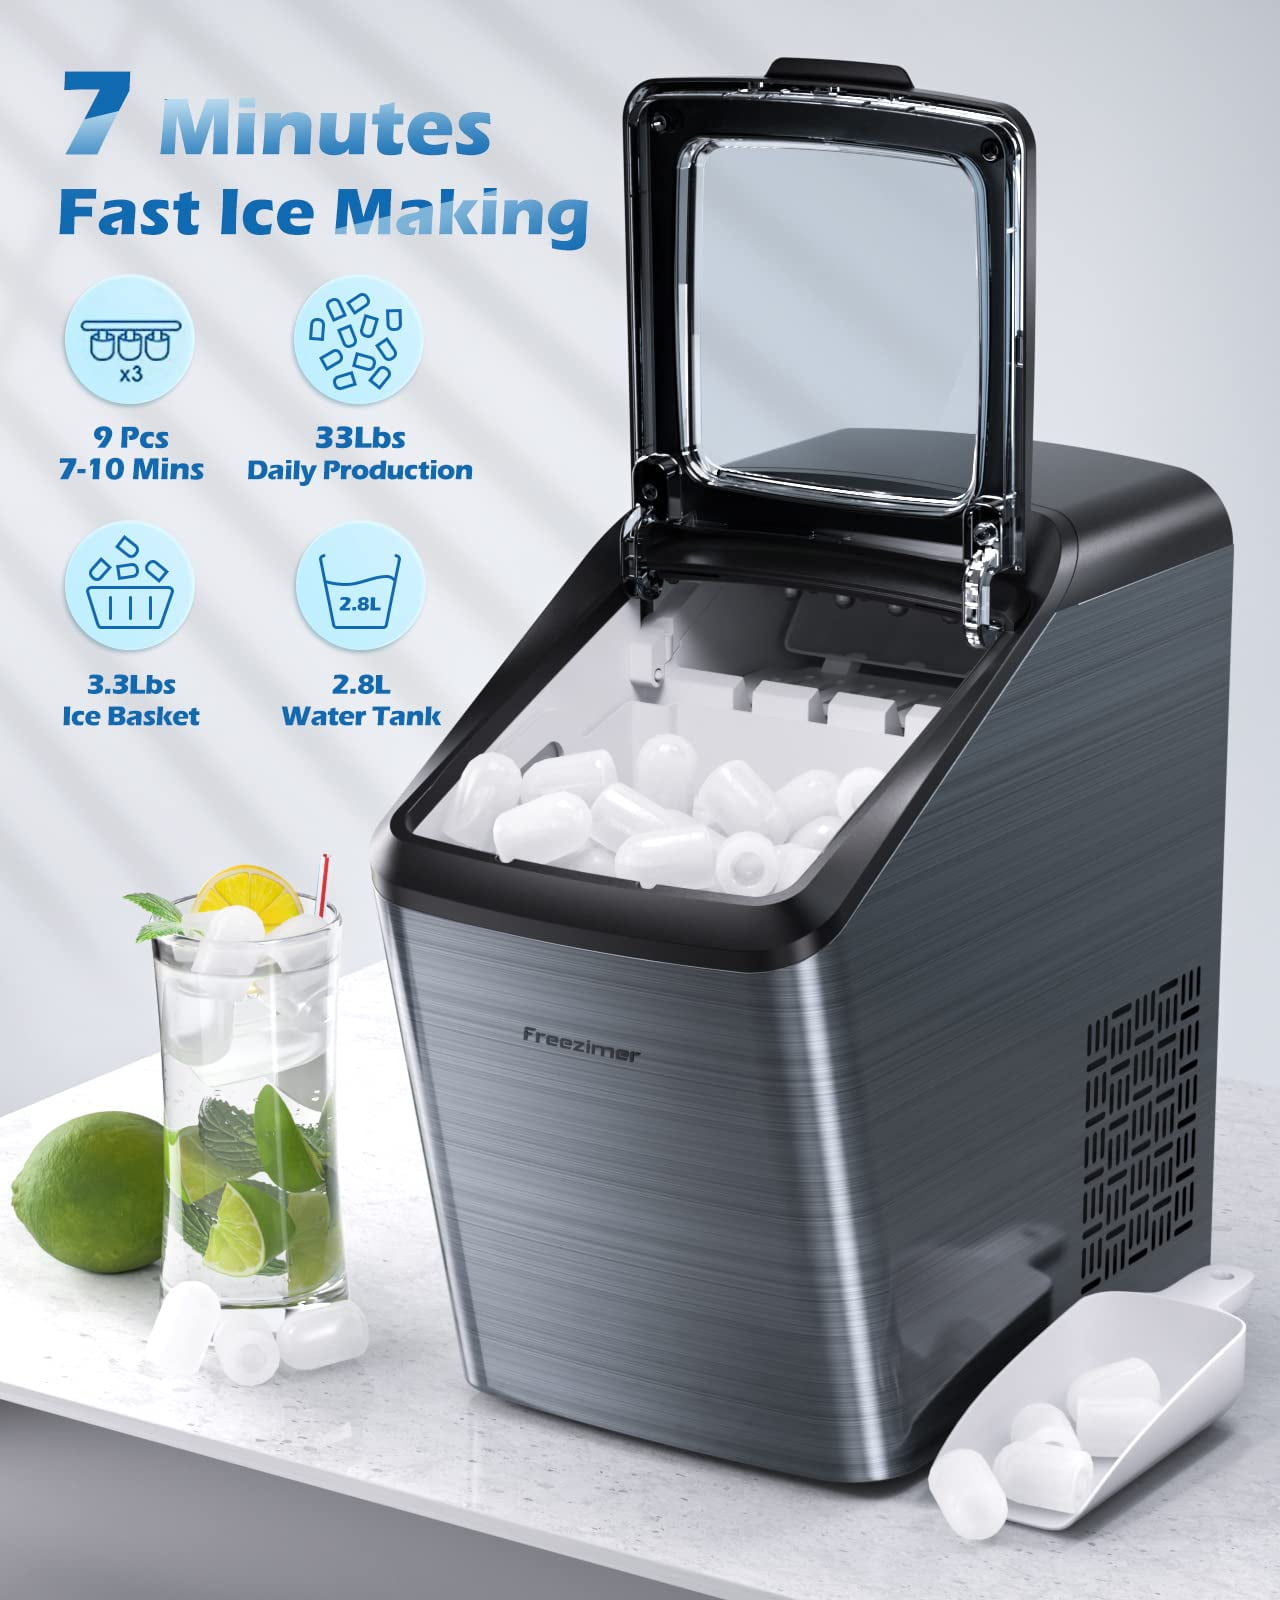 Y90 Portable Bullet Ice Maker Countertop, Easy to use, Low noise – Upstreman